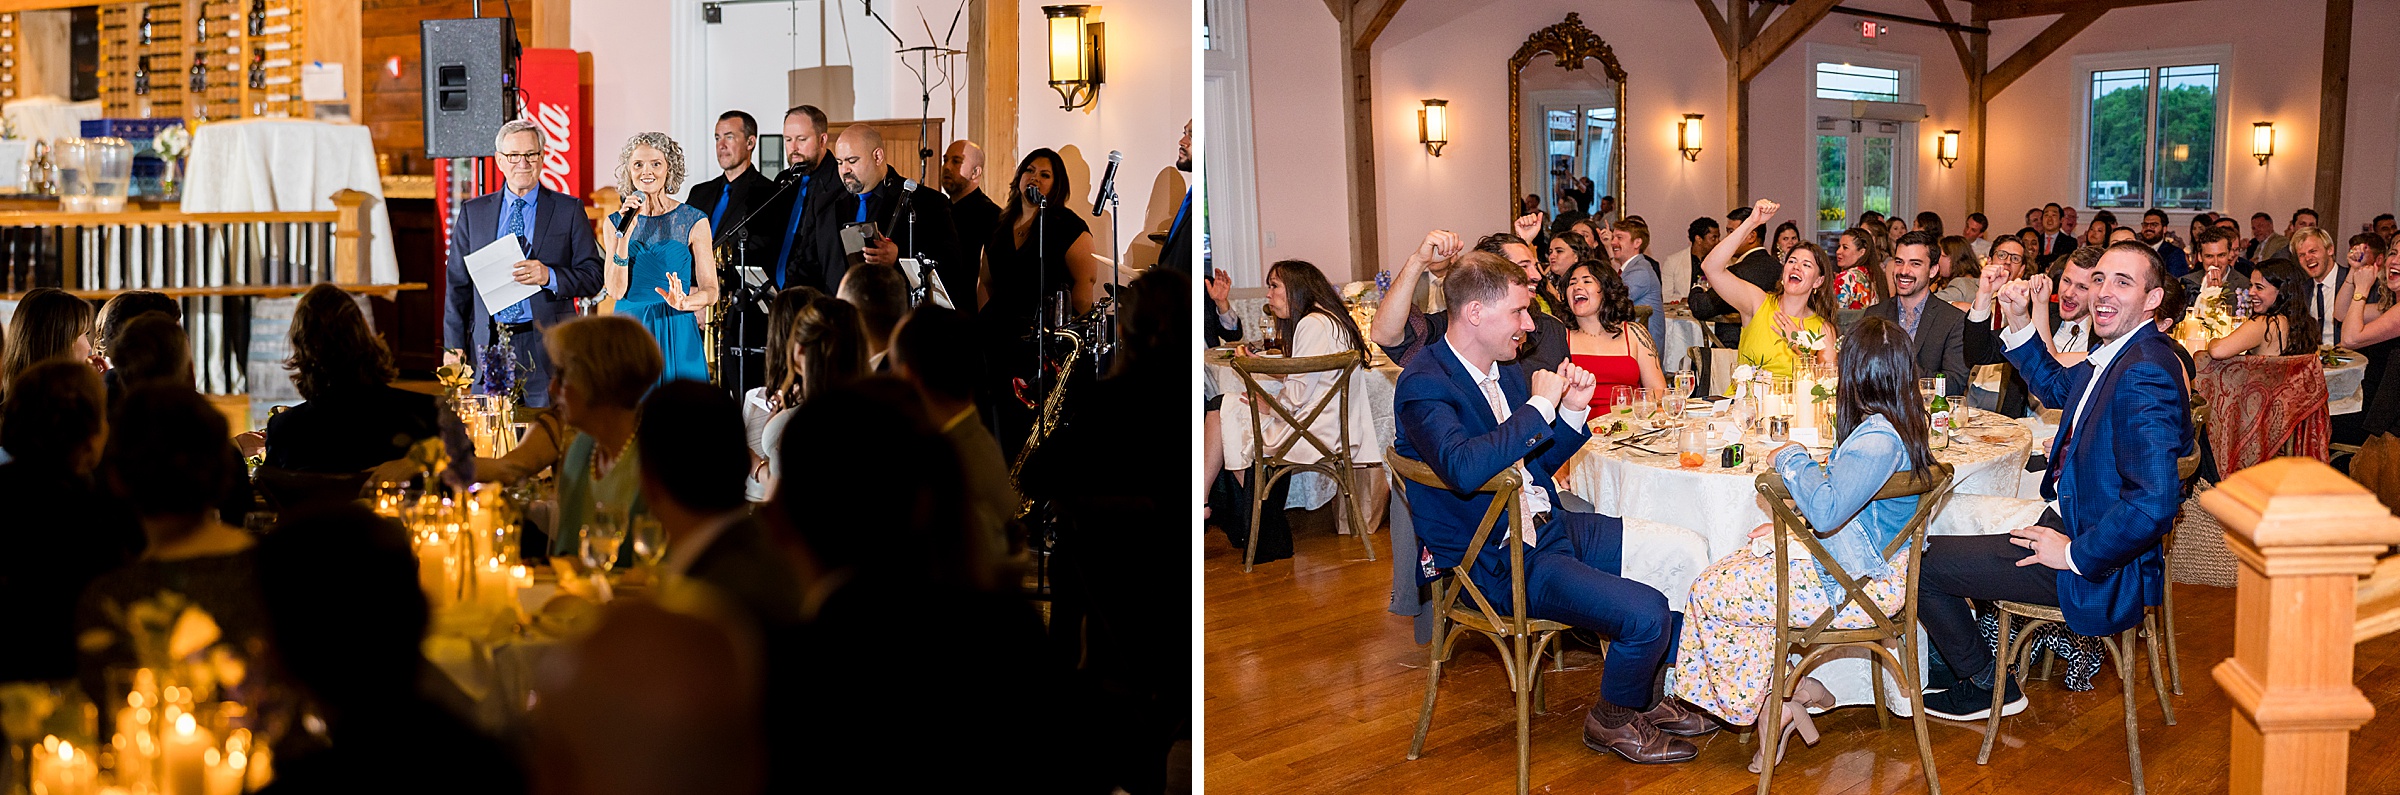 Guests seated at tables in a warmly lit reception hall listen attentively and raise glasses as a person speaks into a microphone in the left frame and diners enjoy the event in the right frame.